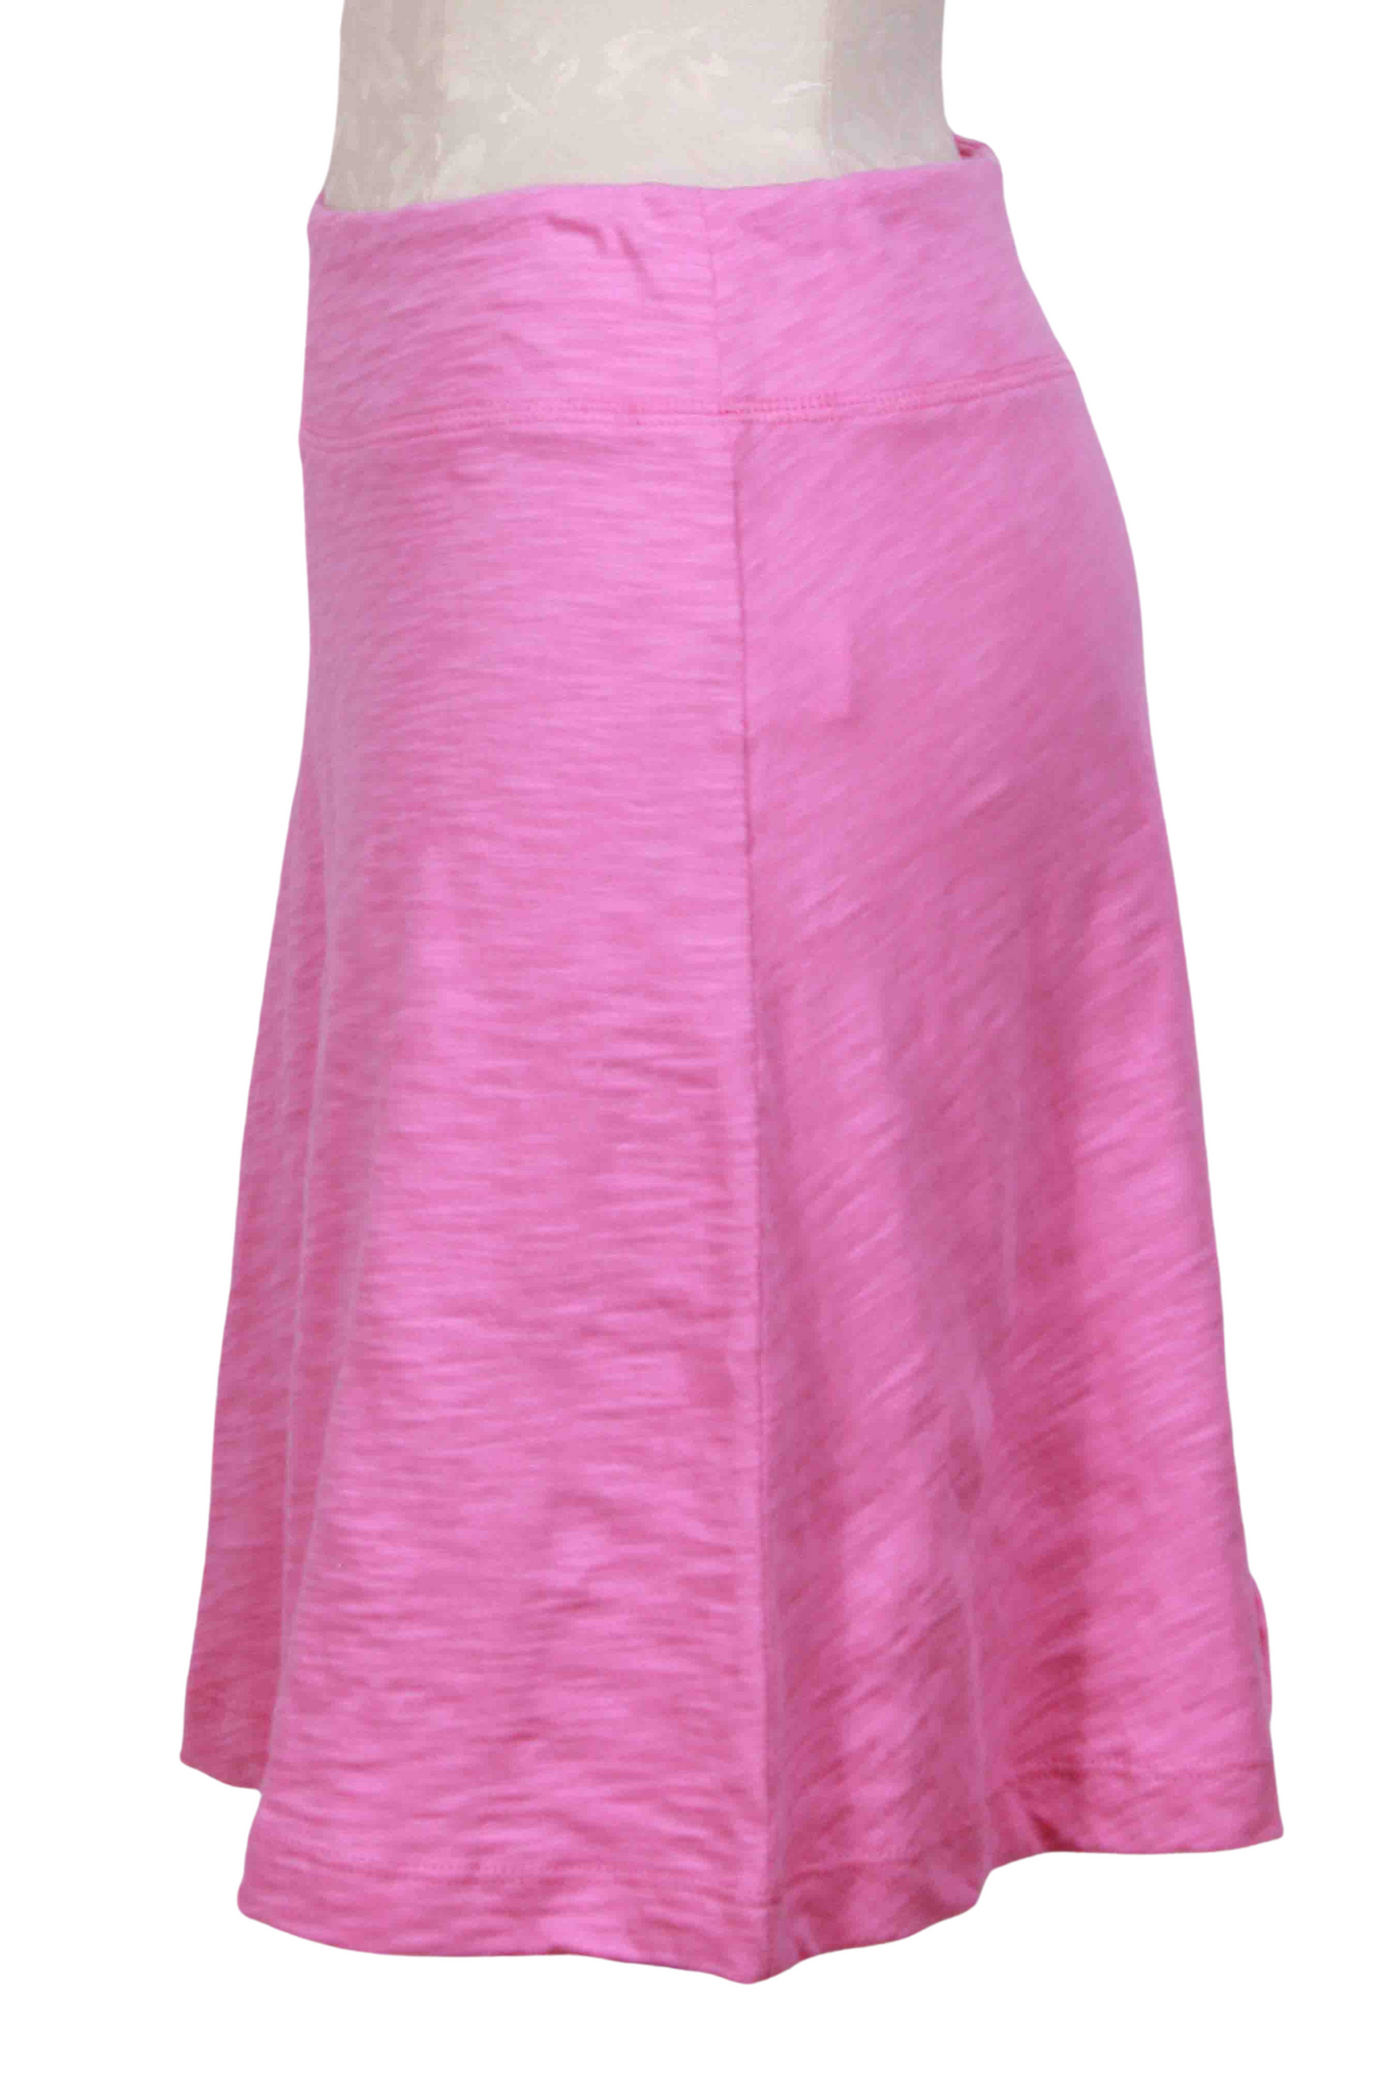 side view of Hibiscus Cotton Slub Beach Skirt by Escape By Habitat